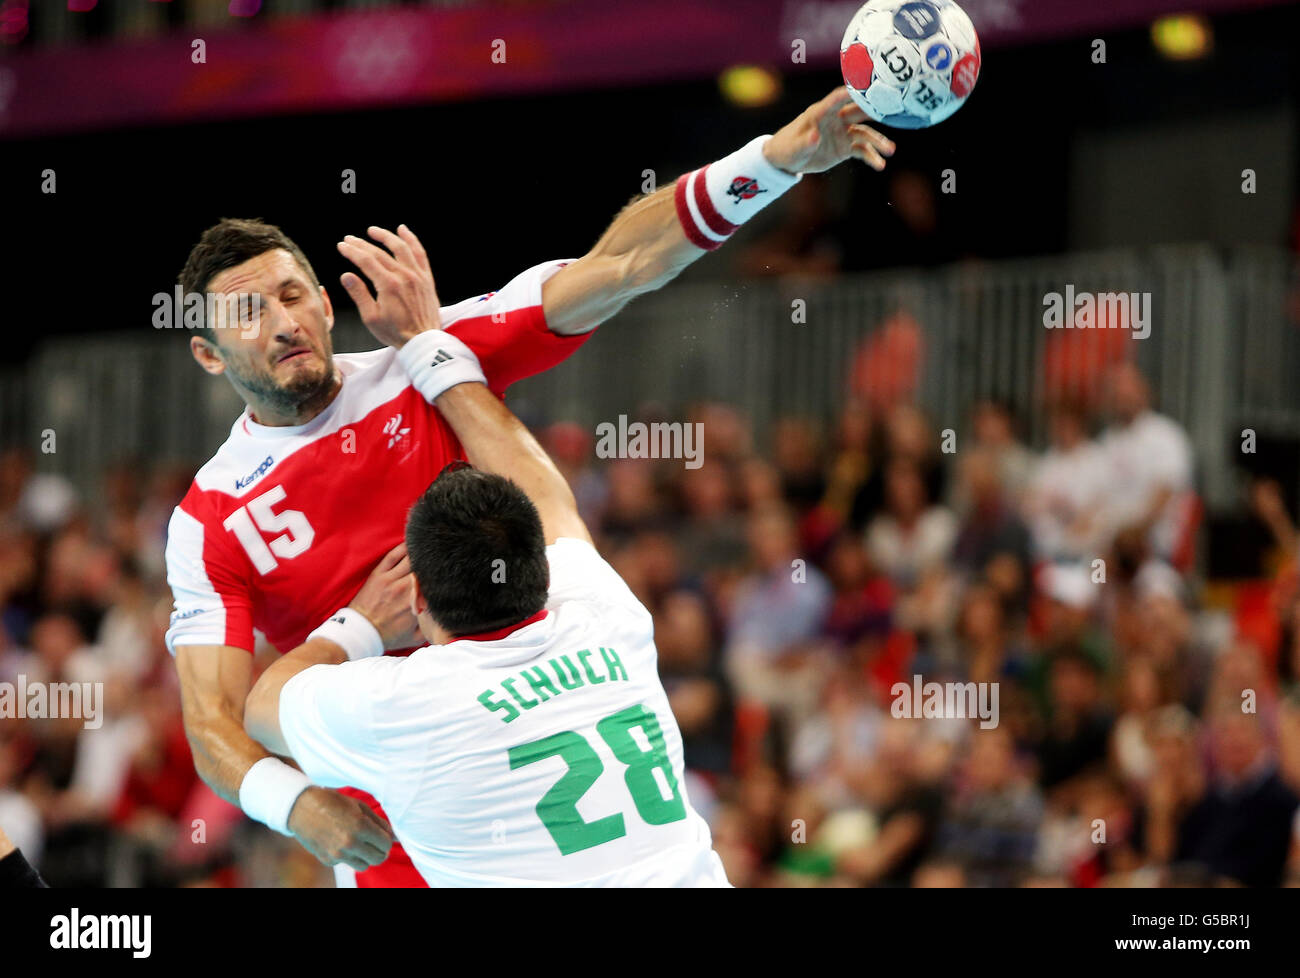 Iceland's Alexander Petersson gets his shot away in the Quarter Final match with Hungary during the Handball Men's Quarterfinal match at the Basketball Arena, Olympic Park, London. Stock Photo